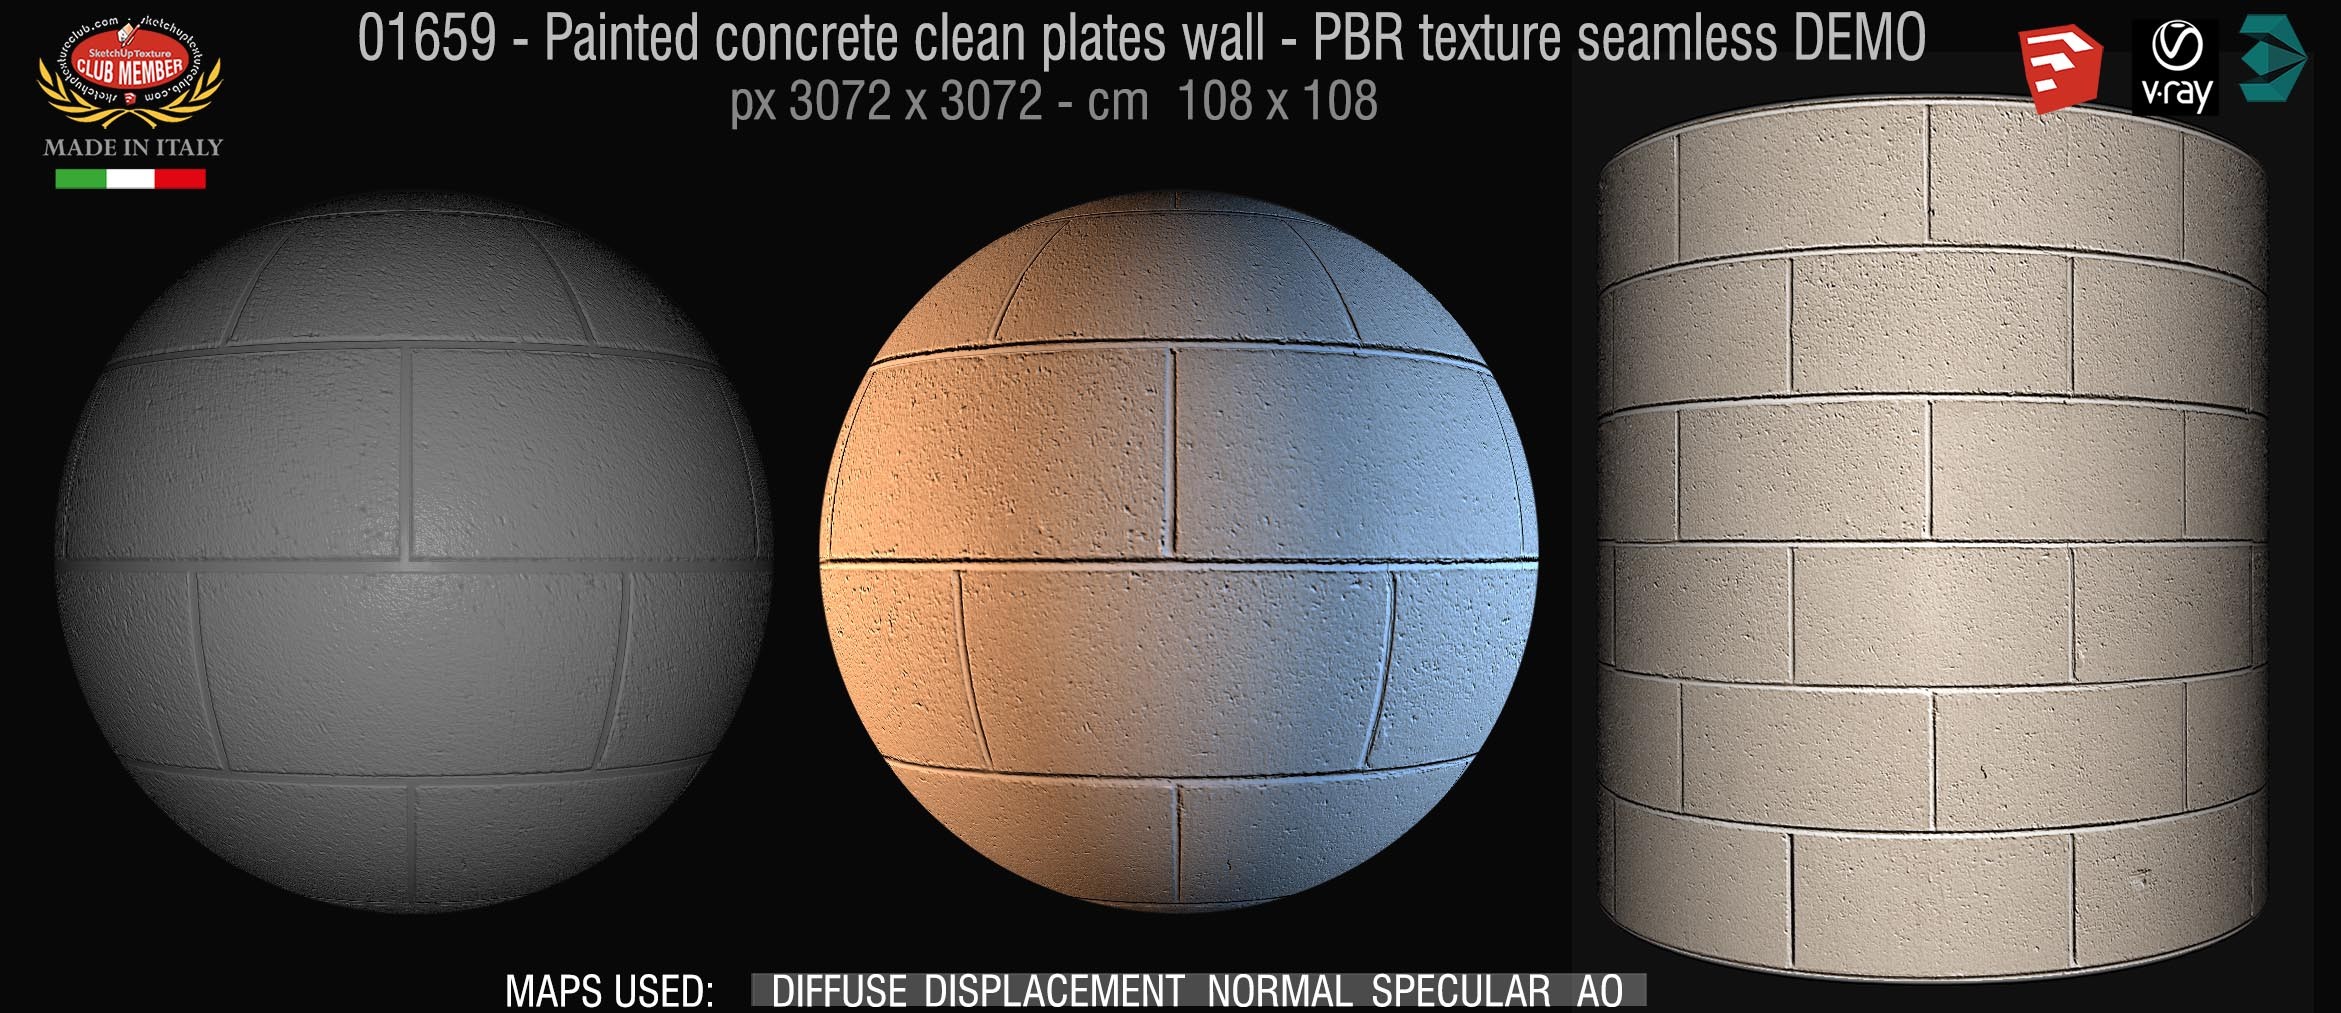 01659 Painted concrete clean plates wall PBR texture seamless DEMO